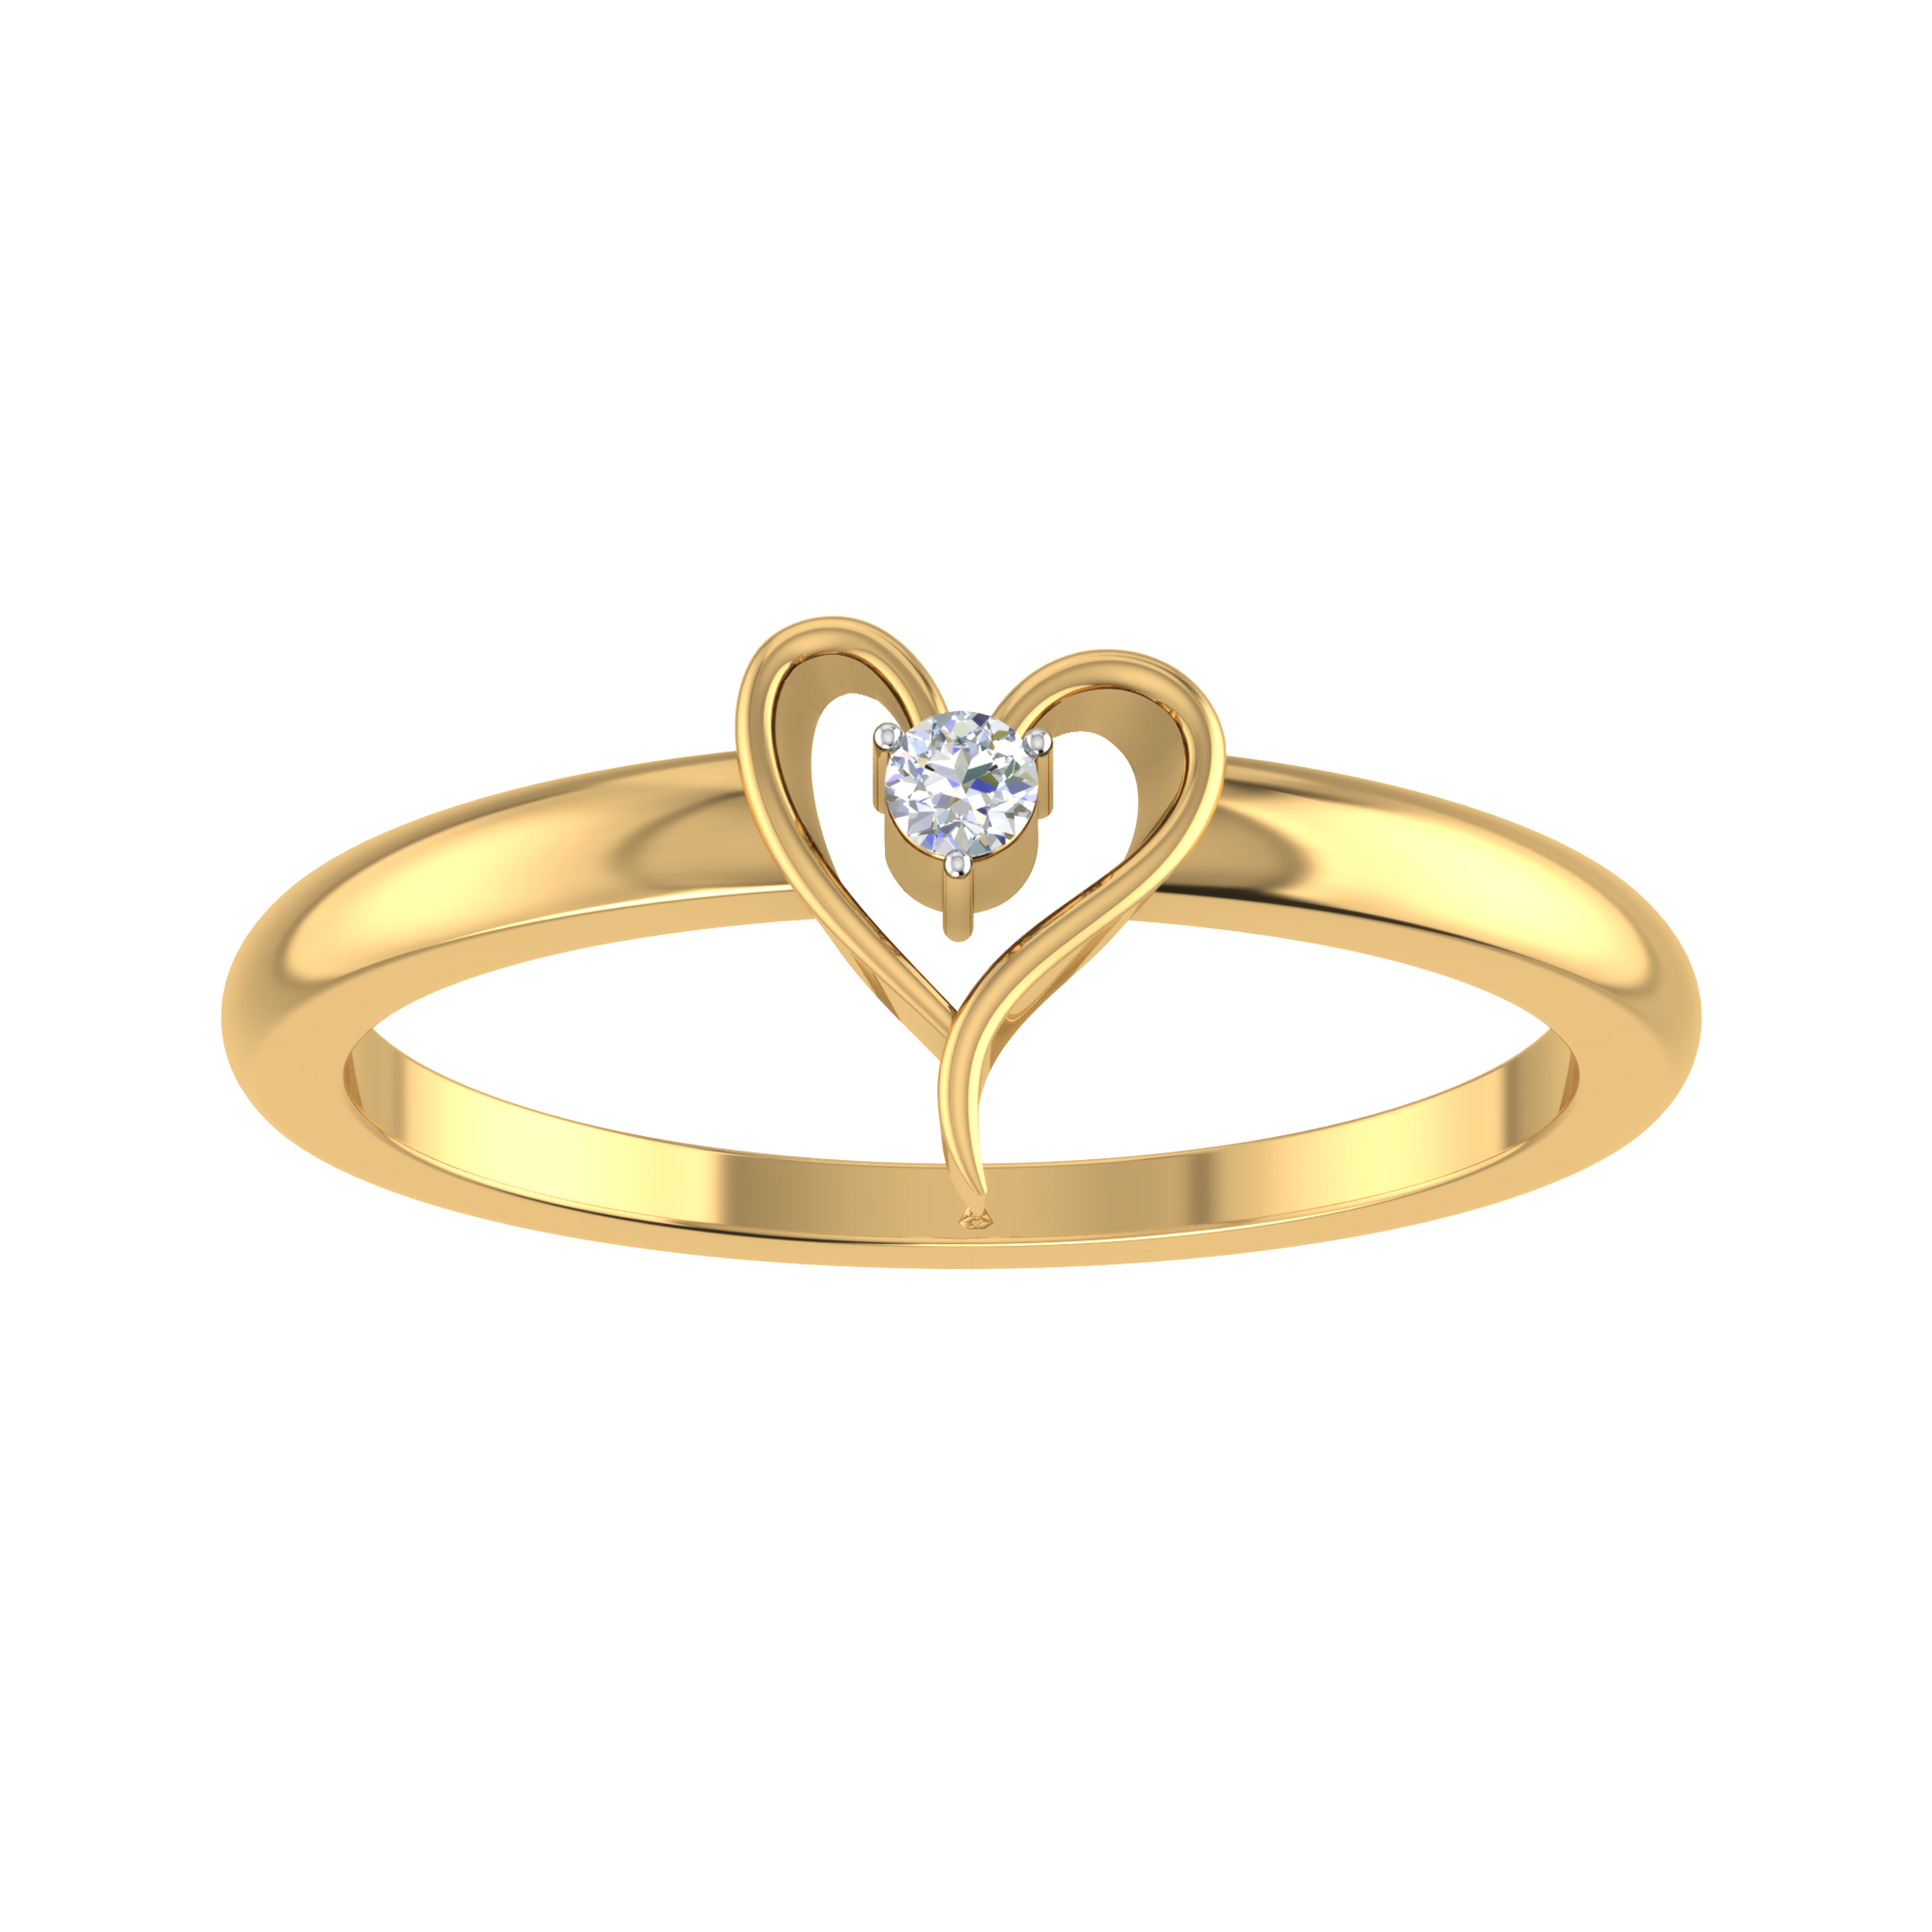 Heart-Shaped Gemstone Rings—Whether Your Love is Old or New!